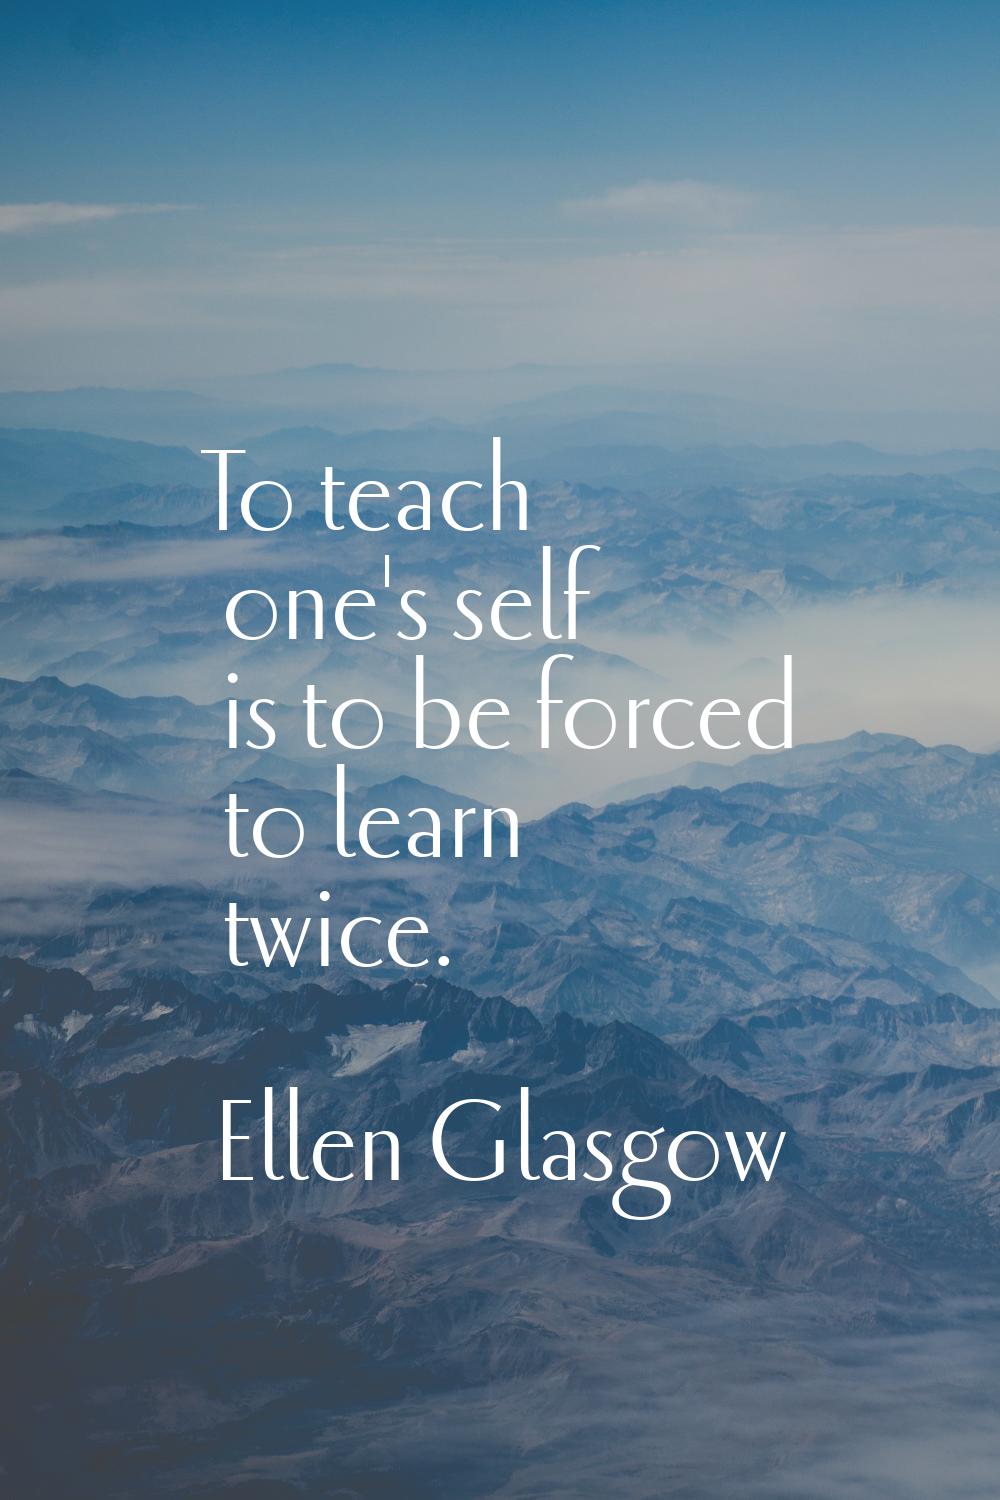 To teach one's self is to be forced to learn twice.